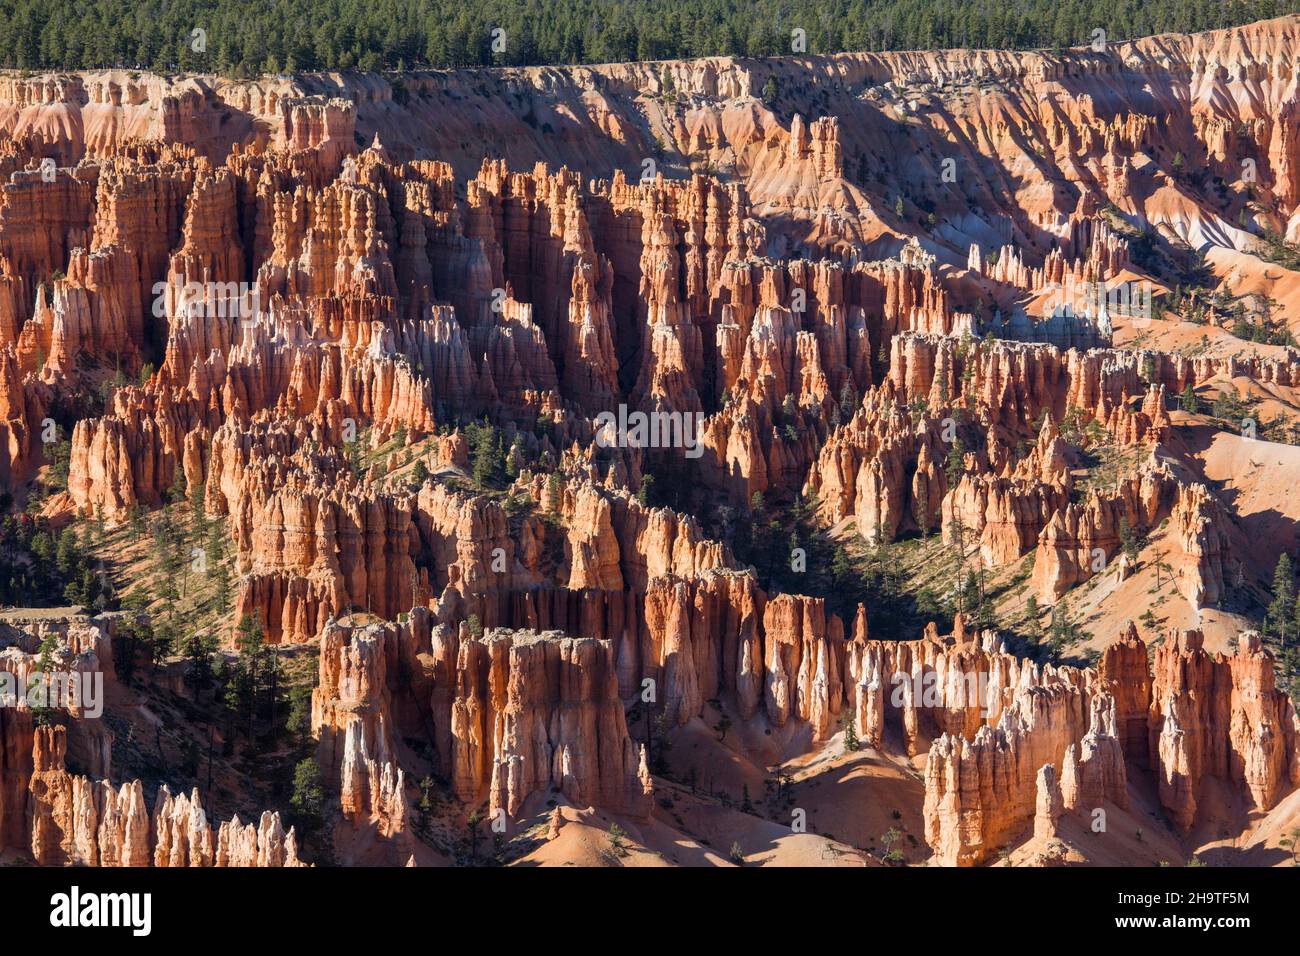 Bryce Canyon National Park, Utah, USA. View over forest of hoodoos in the Silent City from the Rim Trail at Bryce Point. Stock Photo